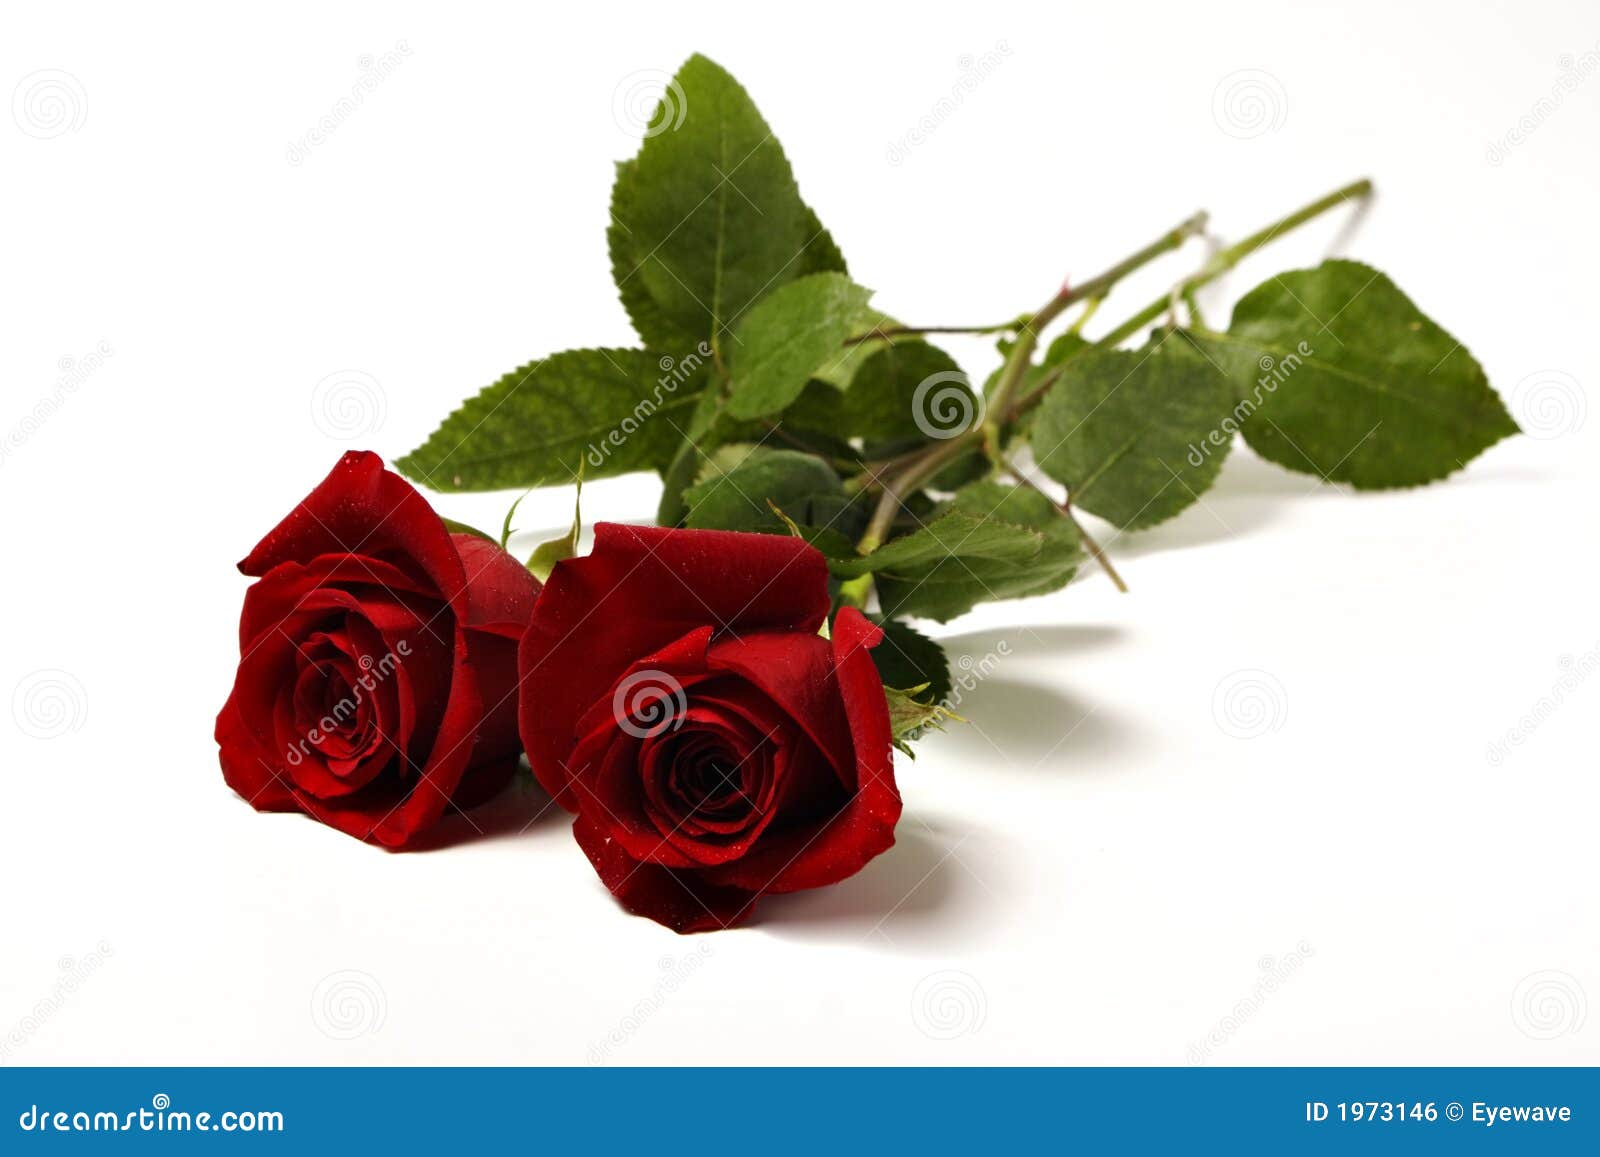 Two red roses stock photo. Image of lovers, affection - 1973146